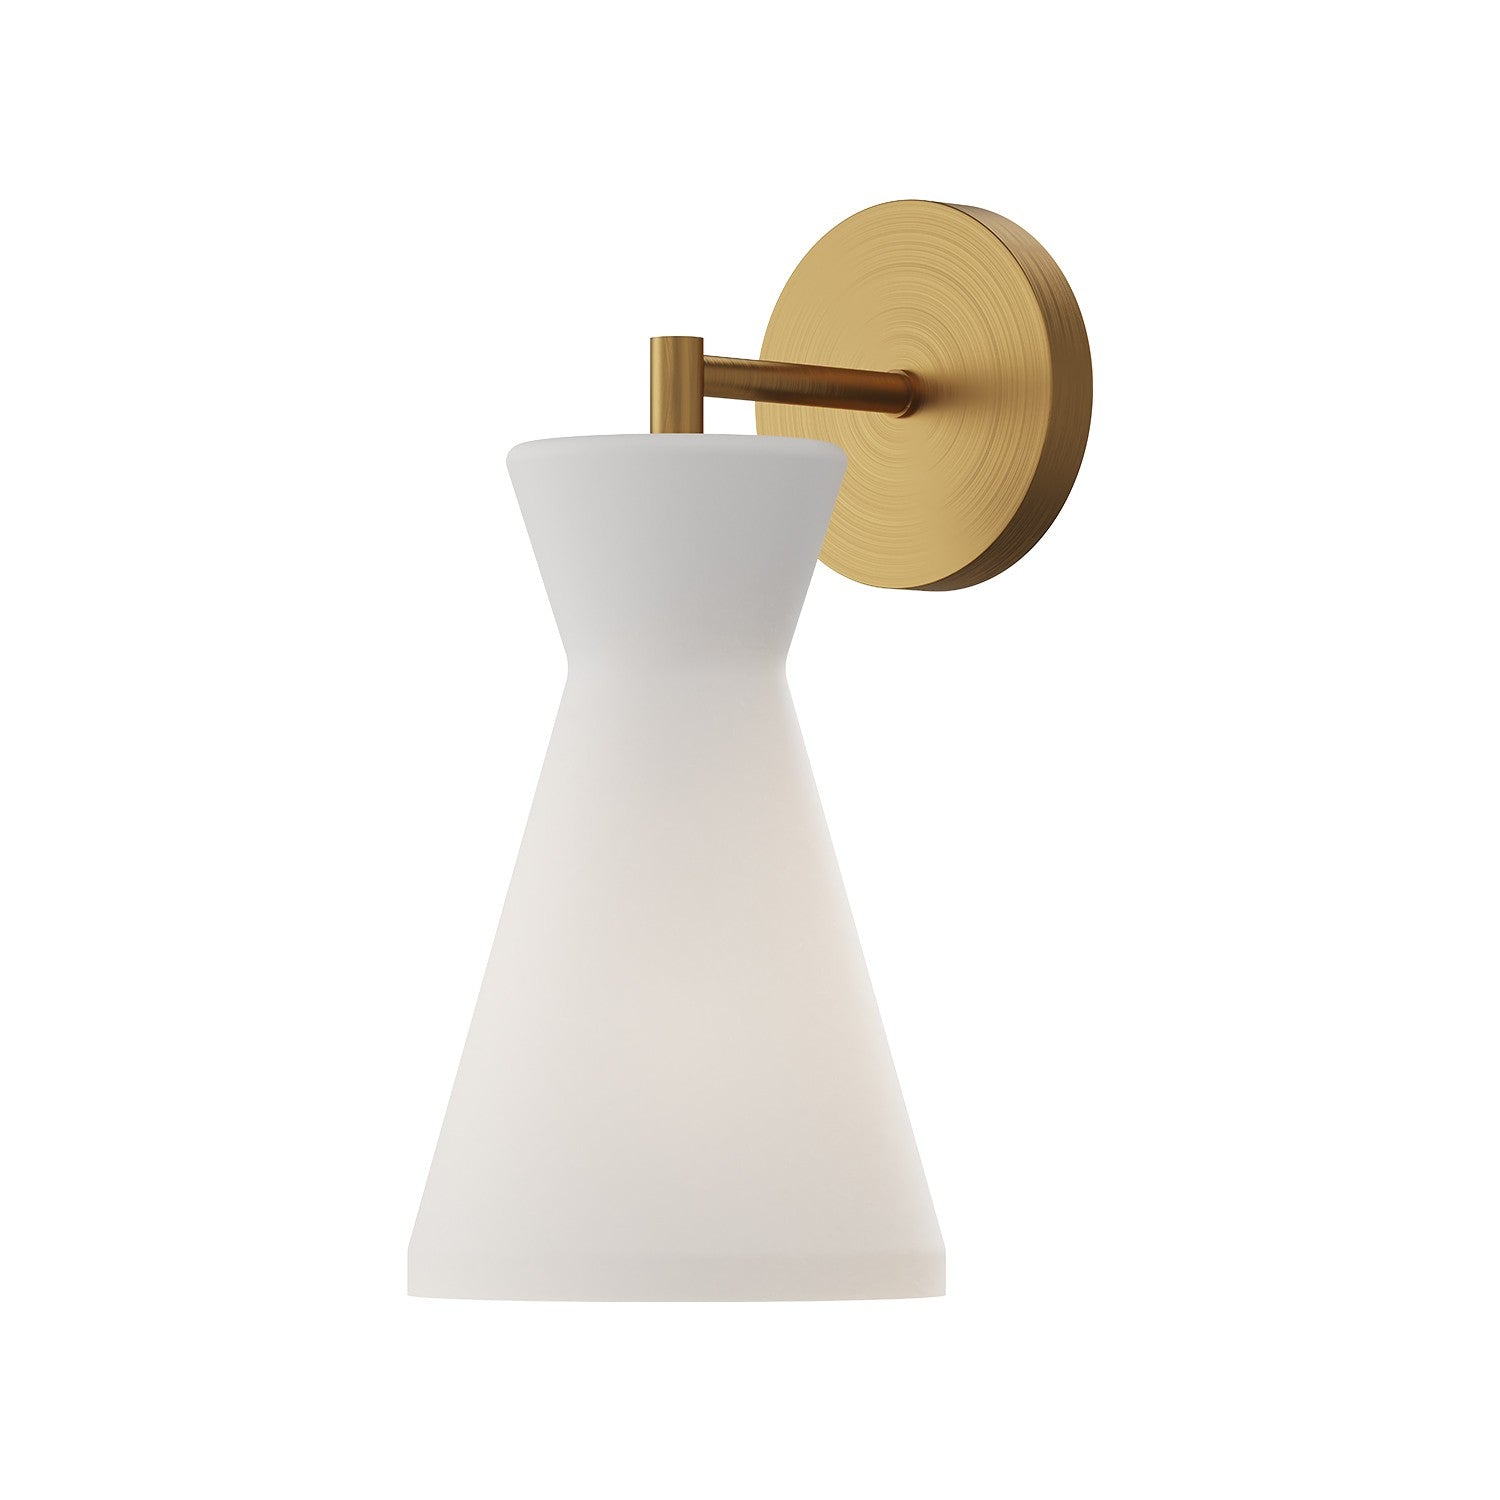 Alora Canada - WV473706AGOP - One Light Wall Sconce - Betty - Aged Gold/Opal Glass